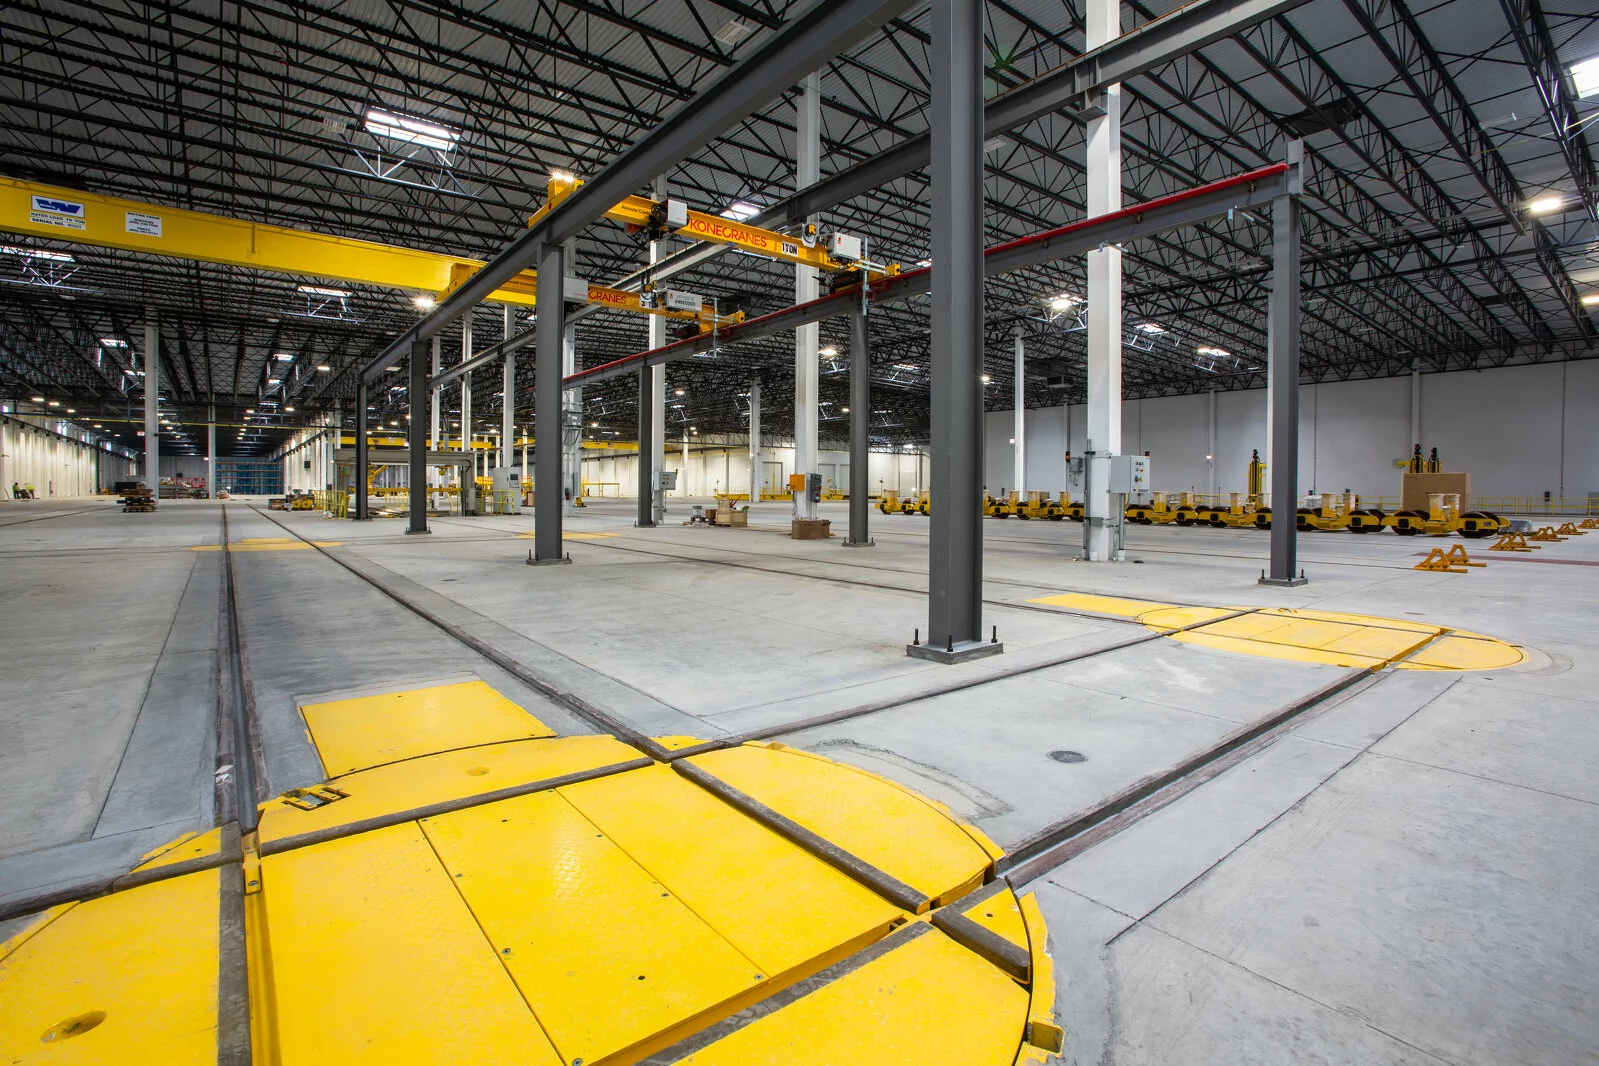 Interior Warehouse/Manufacturing Facility, yellow safety zones, vast warehouse, high ceilings, load bearing beams.